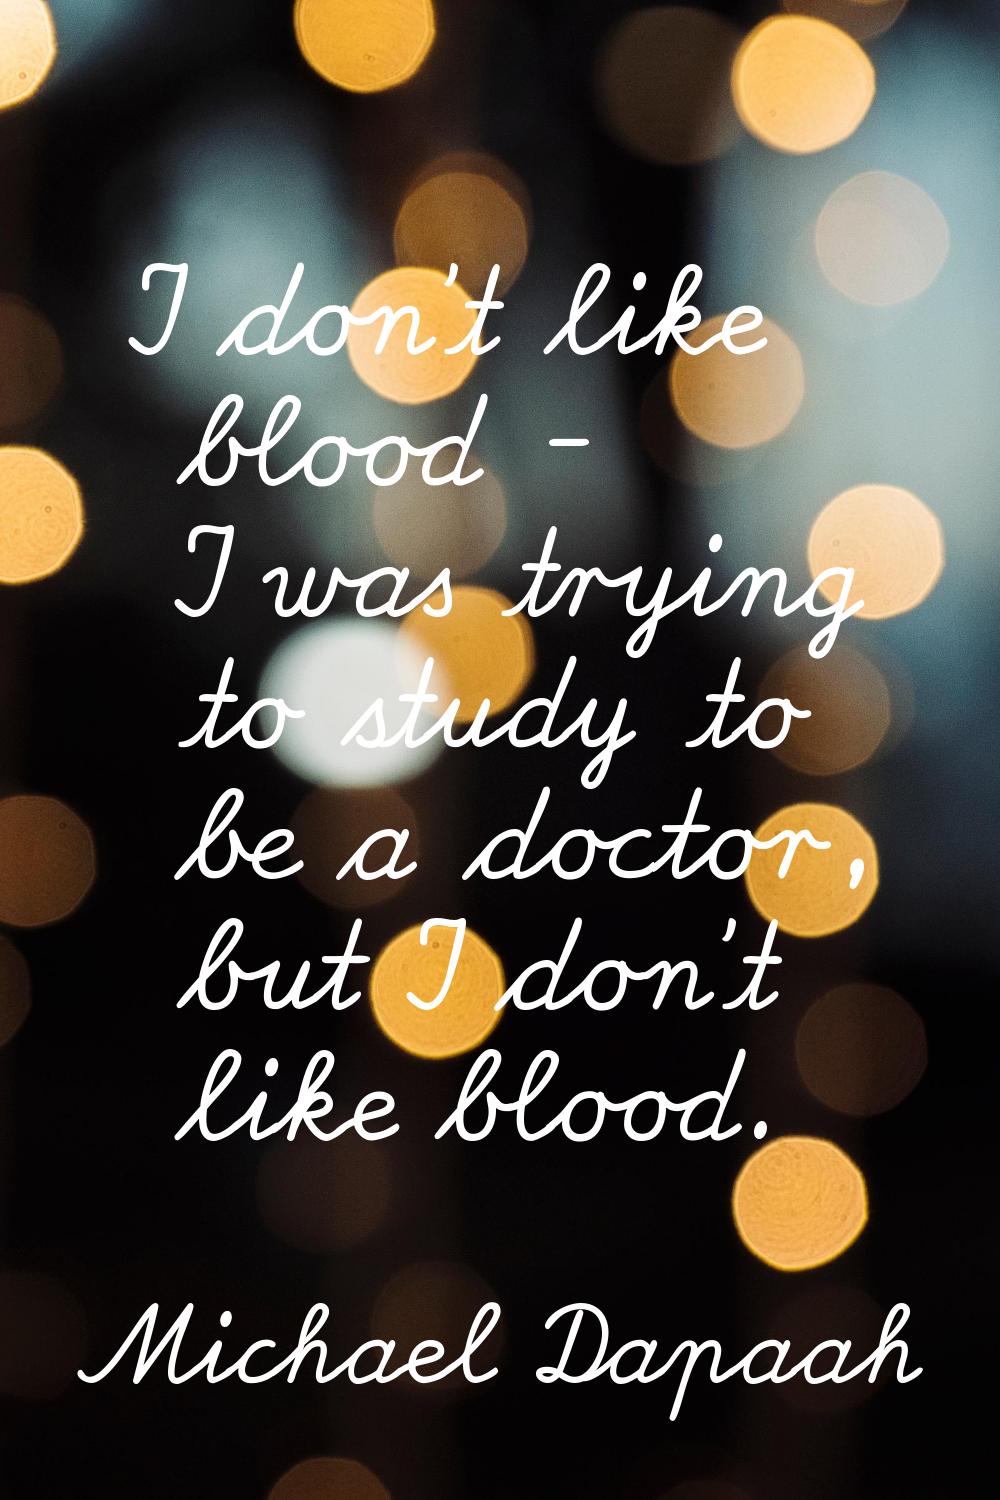 I don't like blood - I was trying to study to be a doctor, but I don't like blood.